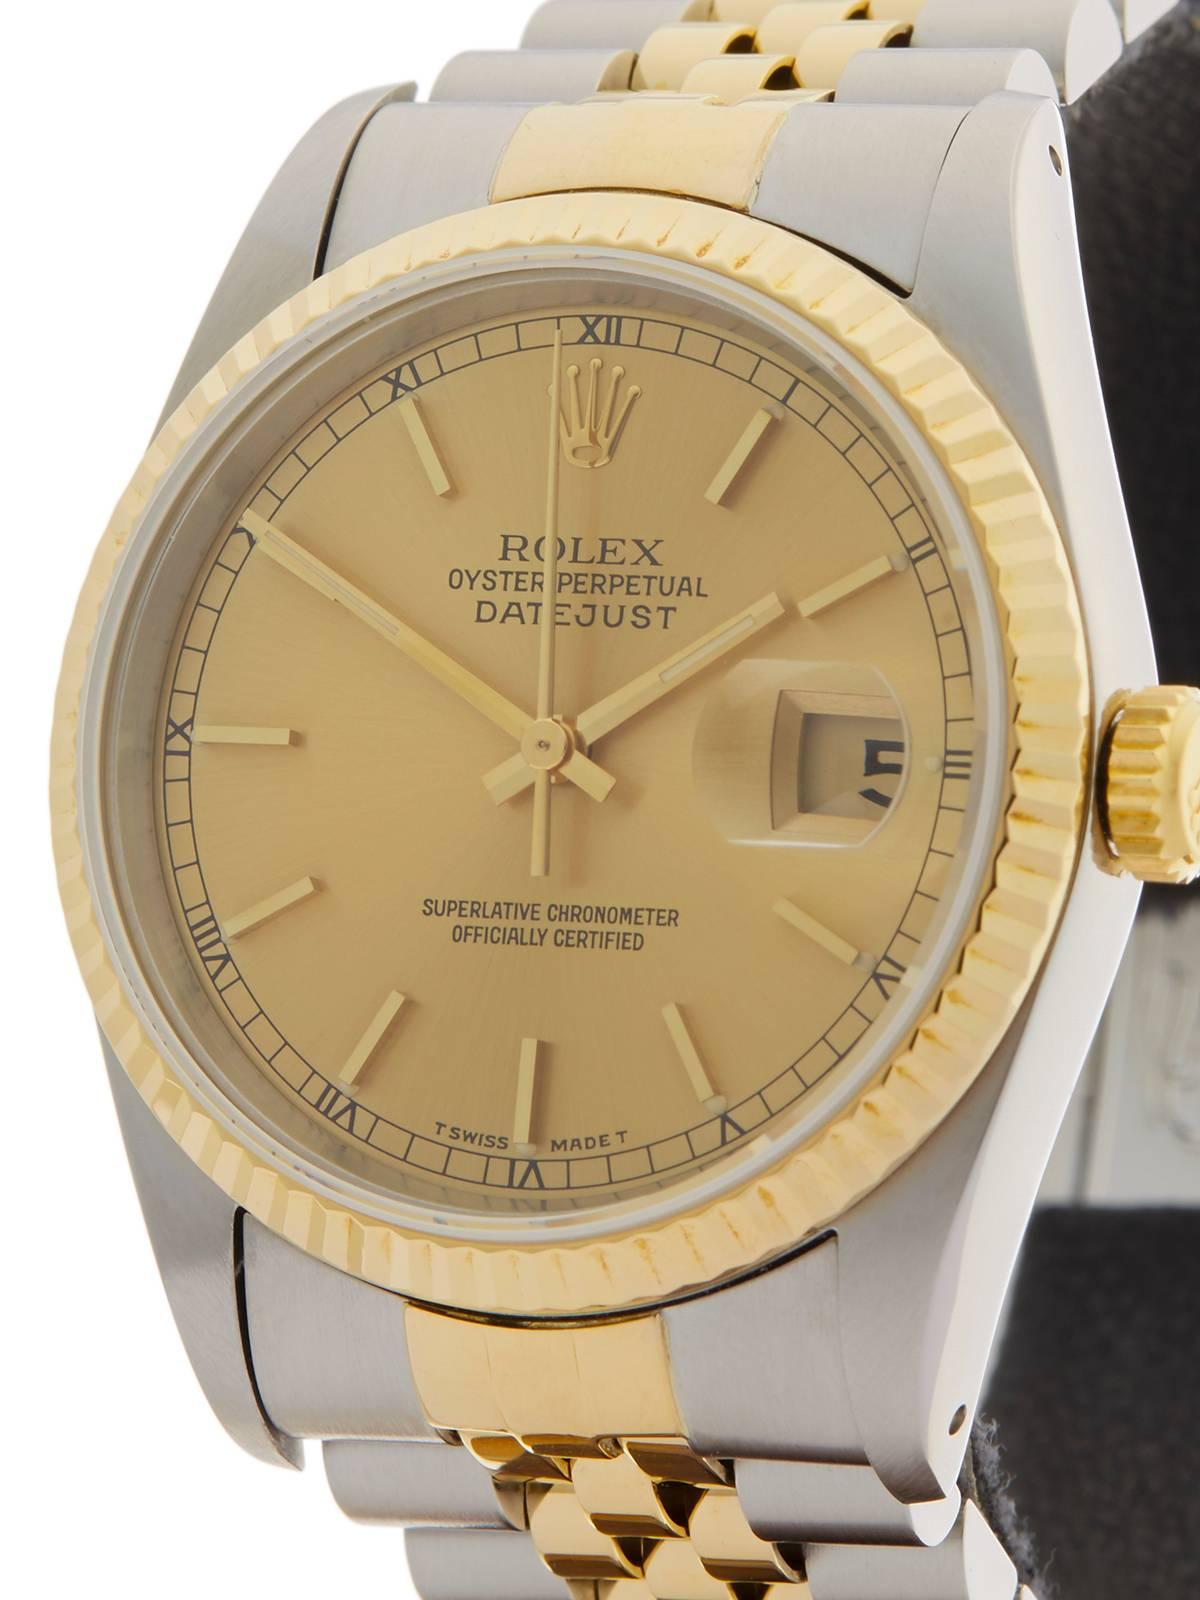 Women's or Men's Rolex Yellow Gold Stainless Steel Datejust Automatic Wristwatch Model 16233